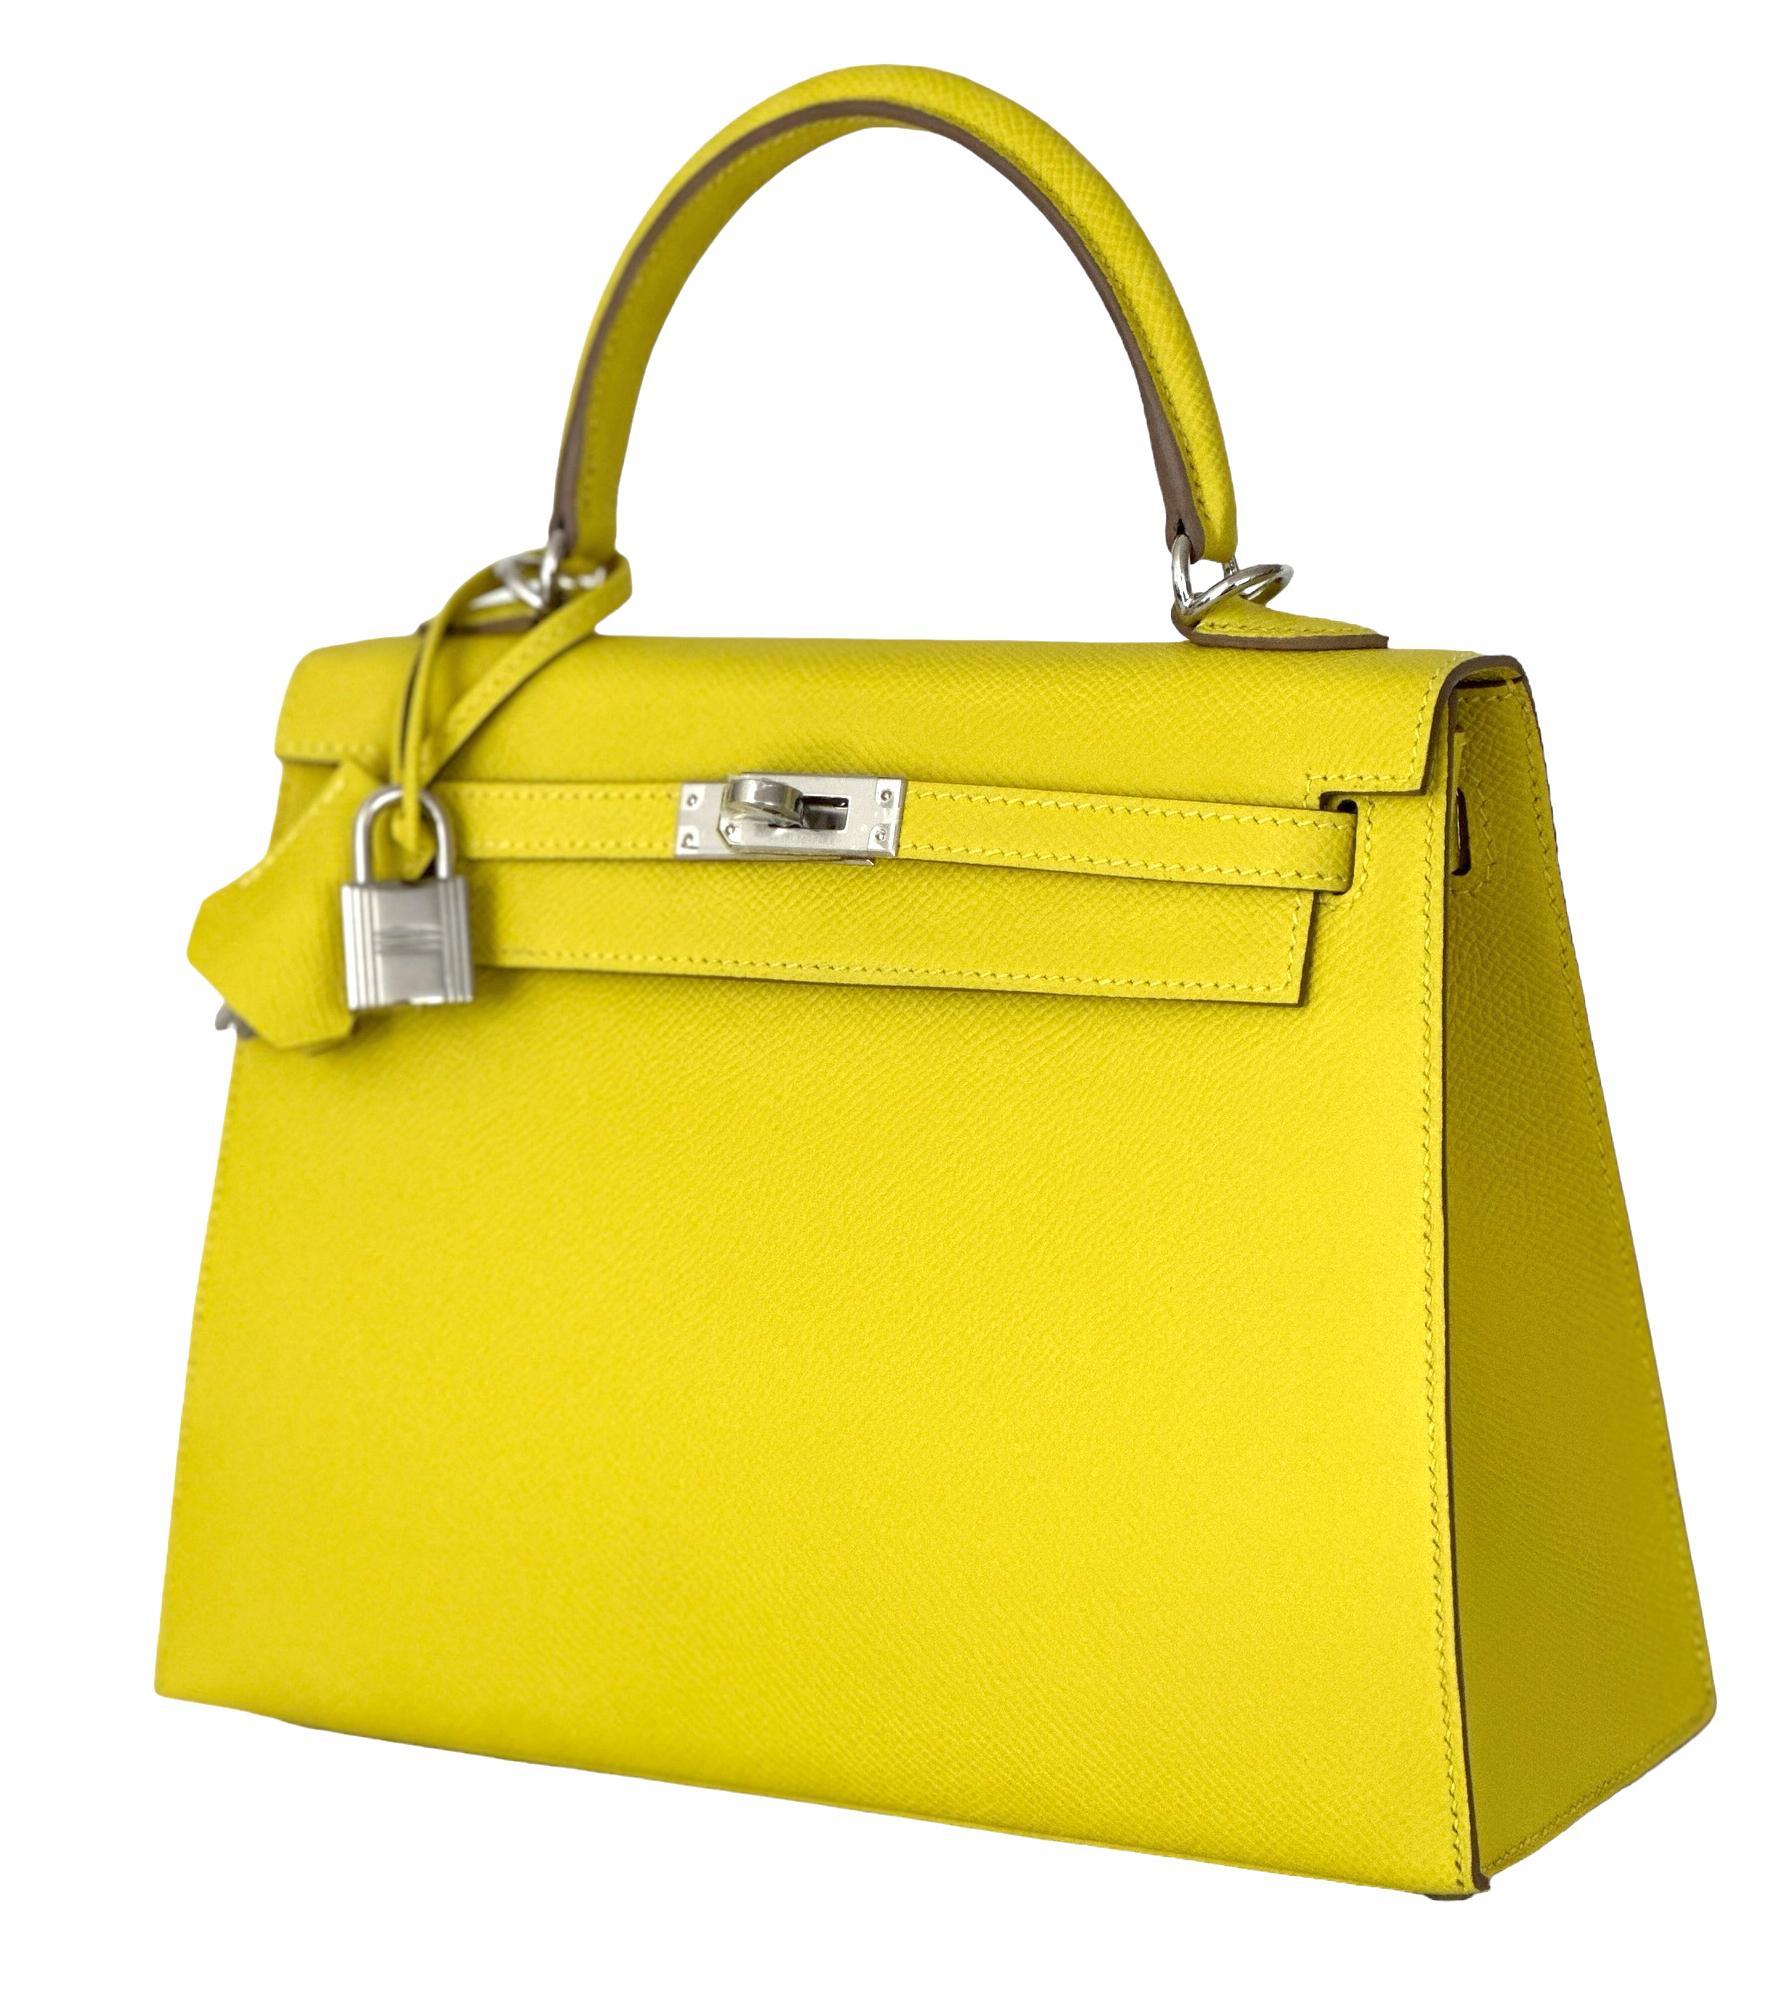 Hermes 25cm Kelly
About the Hermes Kelly Bag:
The Hermes Kelly Bag is a luxurious handbag designed by the French fashion house, Hermès. It was first introduced in the 1930s as a saddlebag for horse riders, but it later became a popular fashion